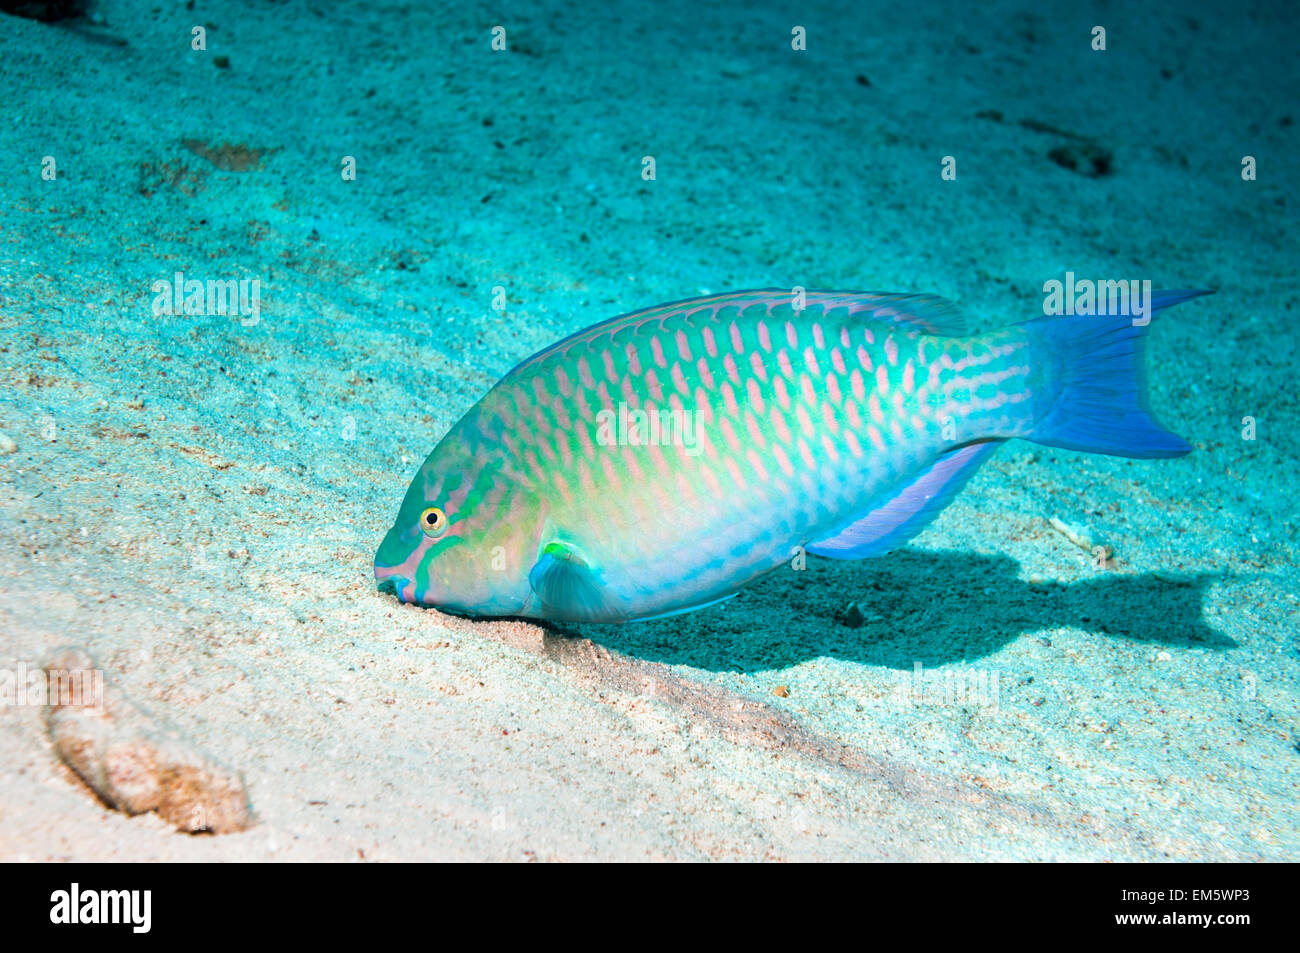 Greenband or Red Sea parrotfish (Scarus collana)  browsing on filamentous algae growing on sand .  Egypt, Red Sea. Stock Photo